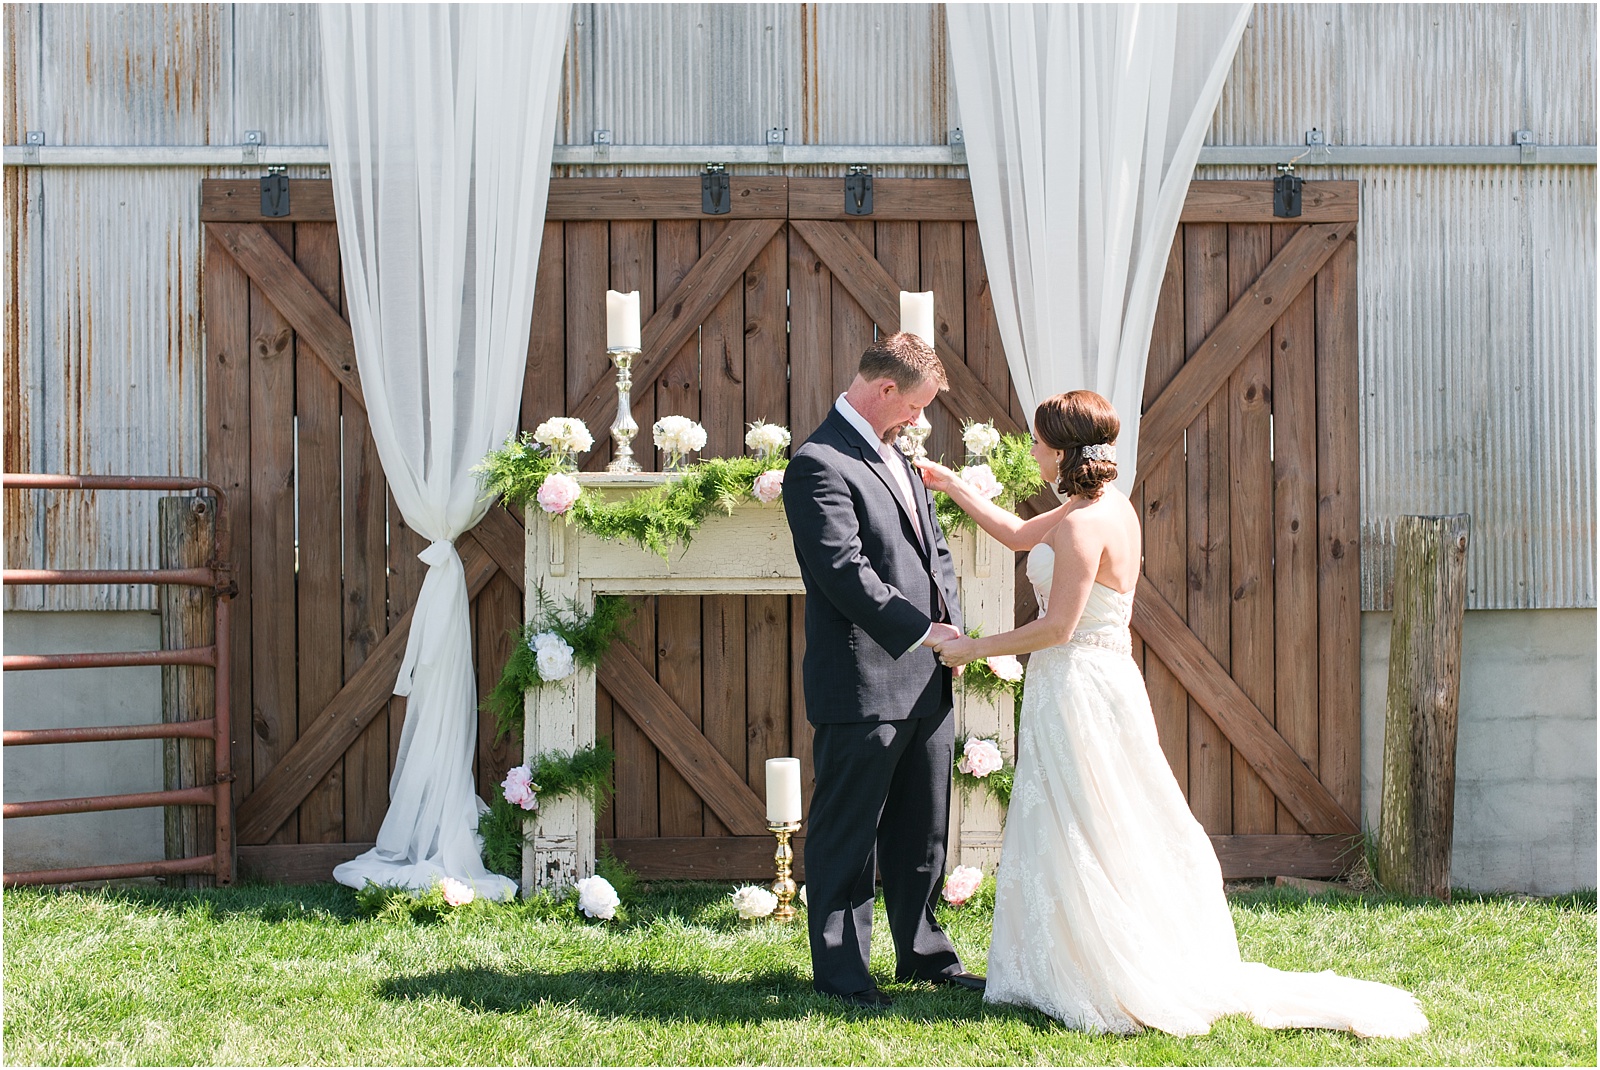 A Country Chic Starlight Meadows Wedding, Burlington NC, ceremony details, ceremony centerpiece, ceremony greenery, outdoor wedding ceremony, outdoor wedding ceremony centerpiece, Starlight Meadows, Flowers By Gary, first look, bride and groom first look